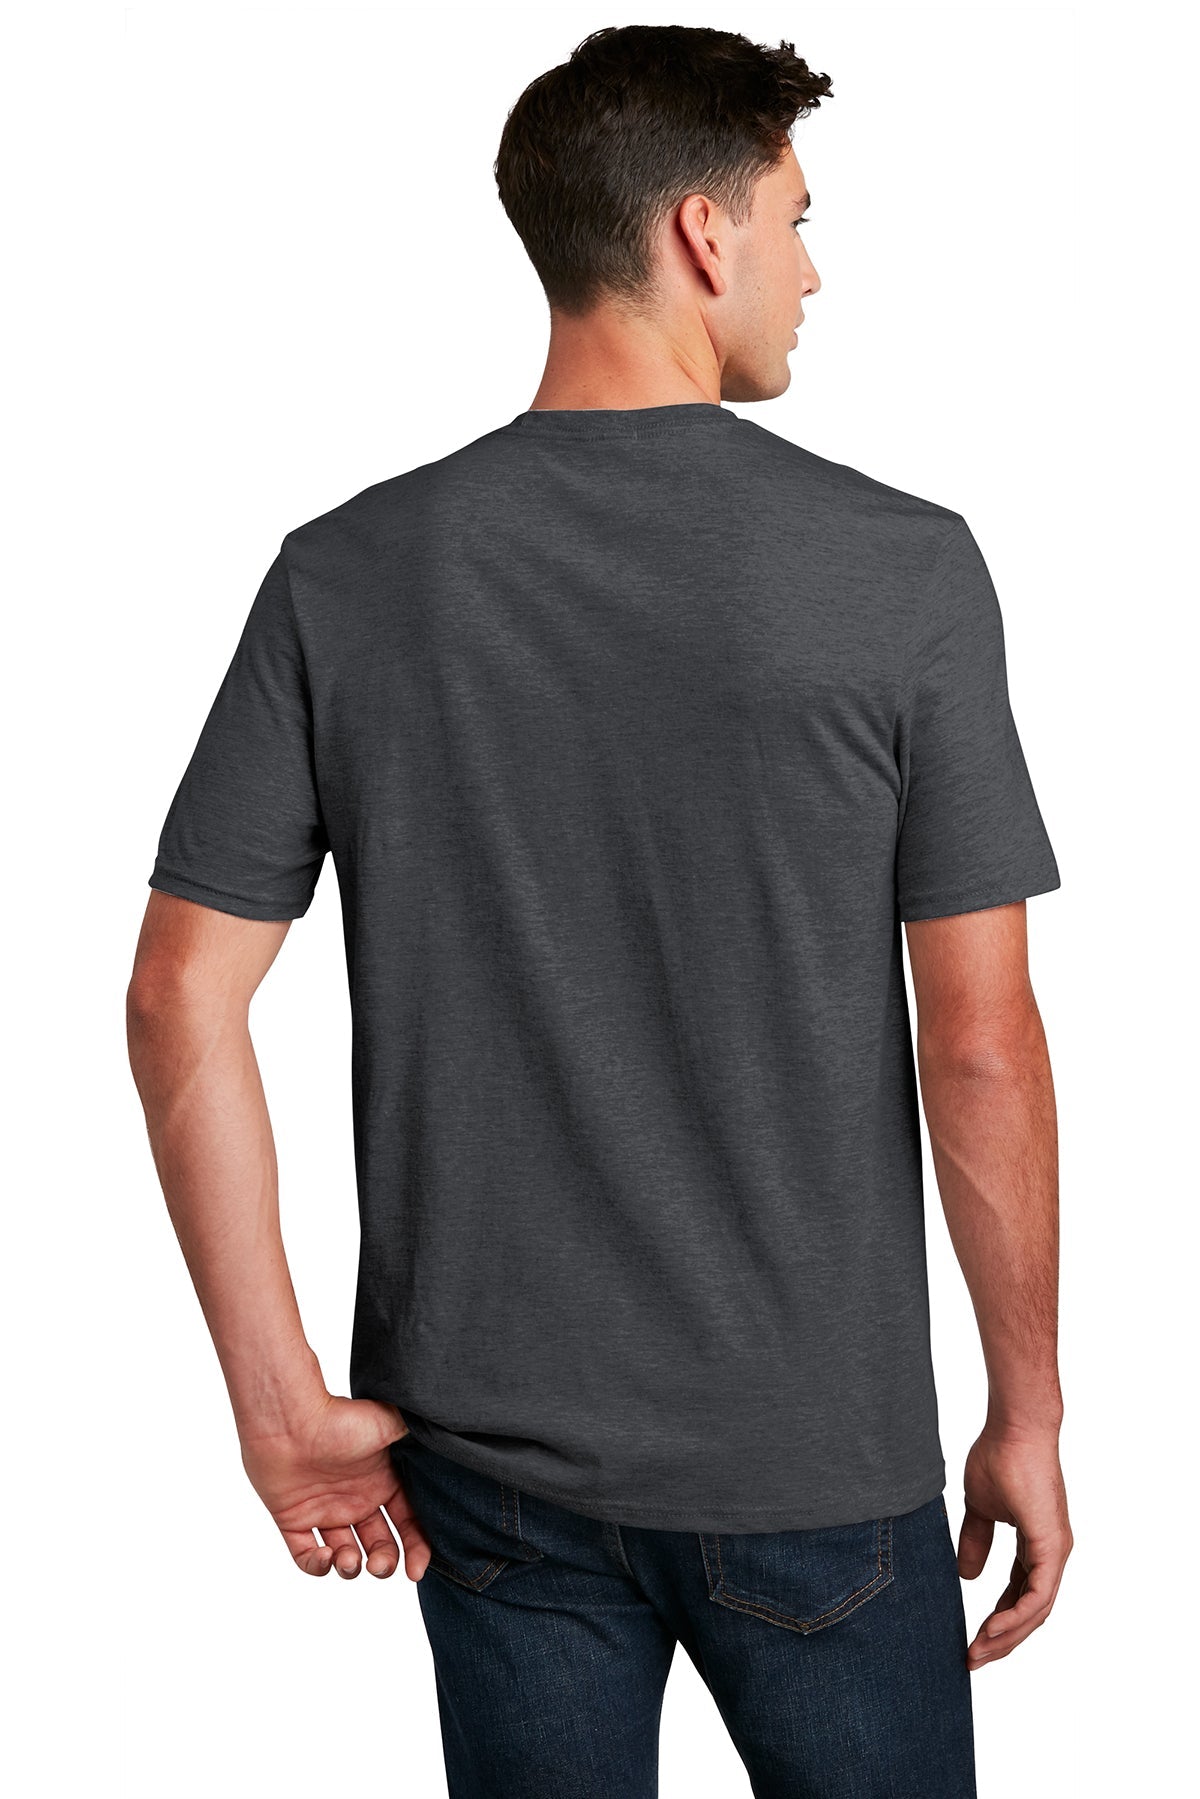 District Made Mens Perfect Blend Tee's, Heathered Charcoal